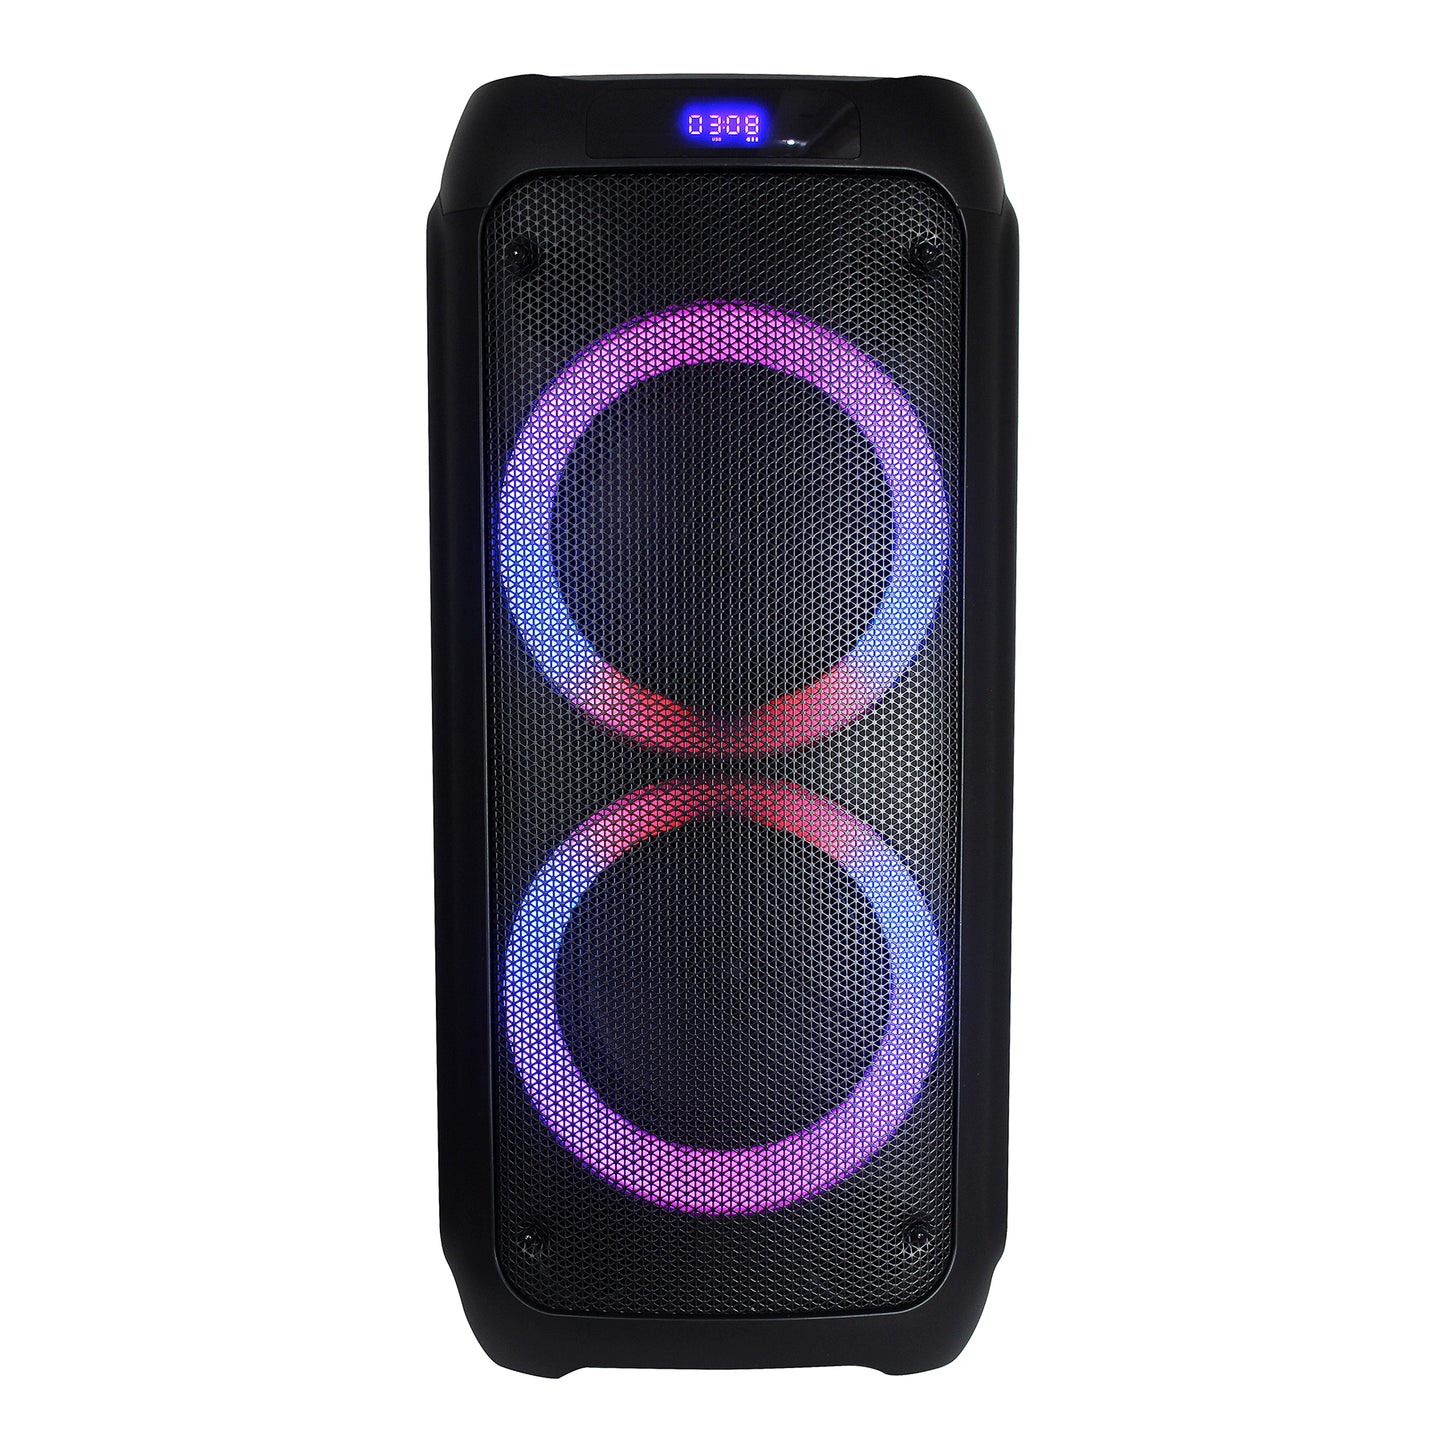 2x 8” Portable Bluetooth® Speaker with Light Show